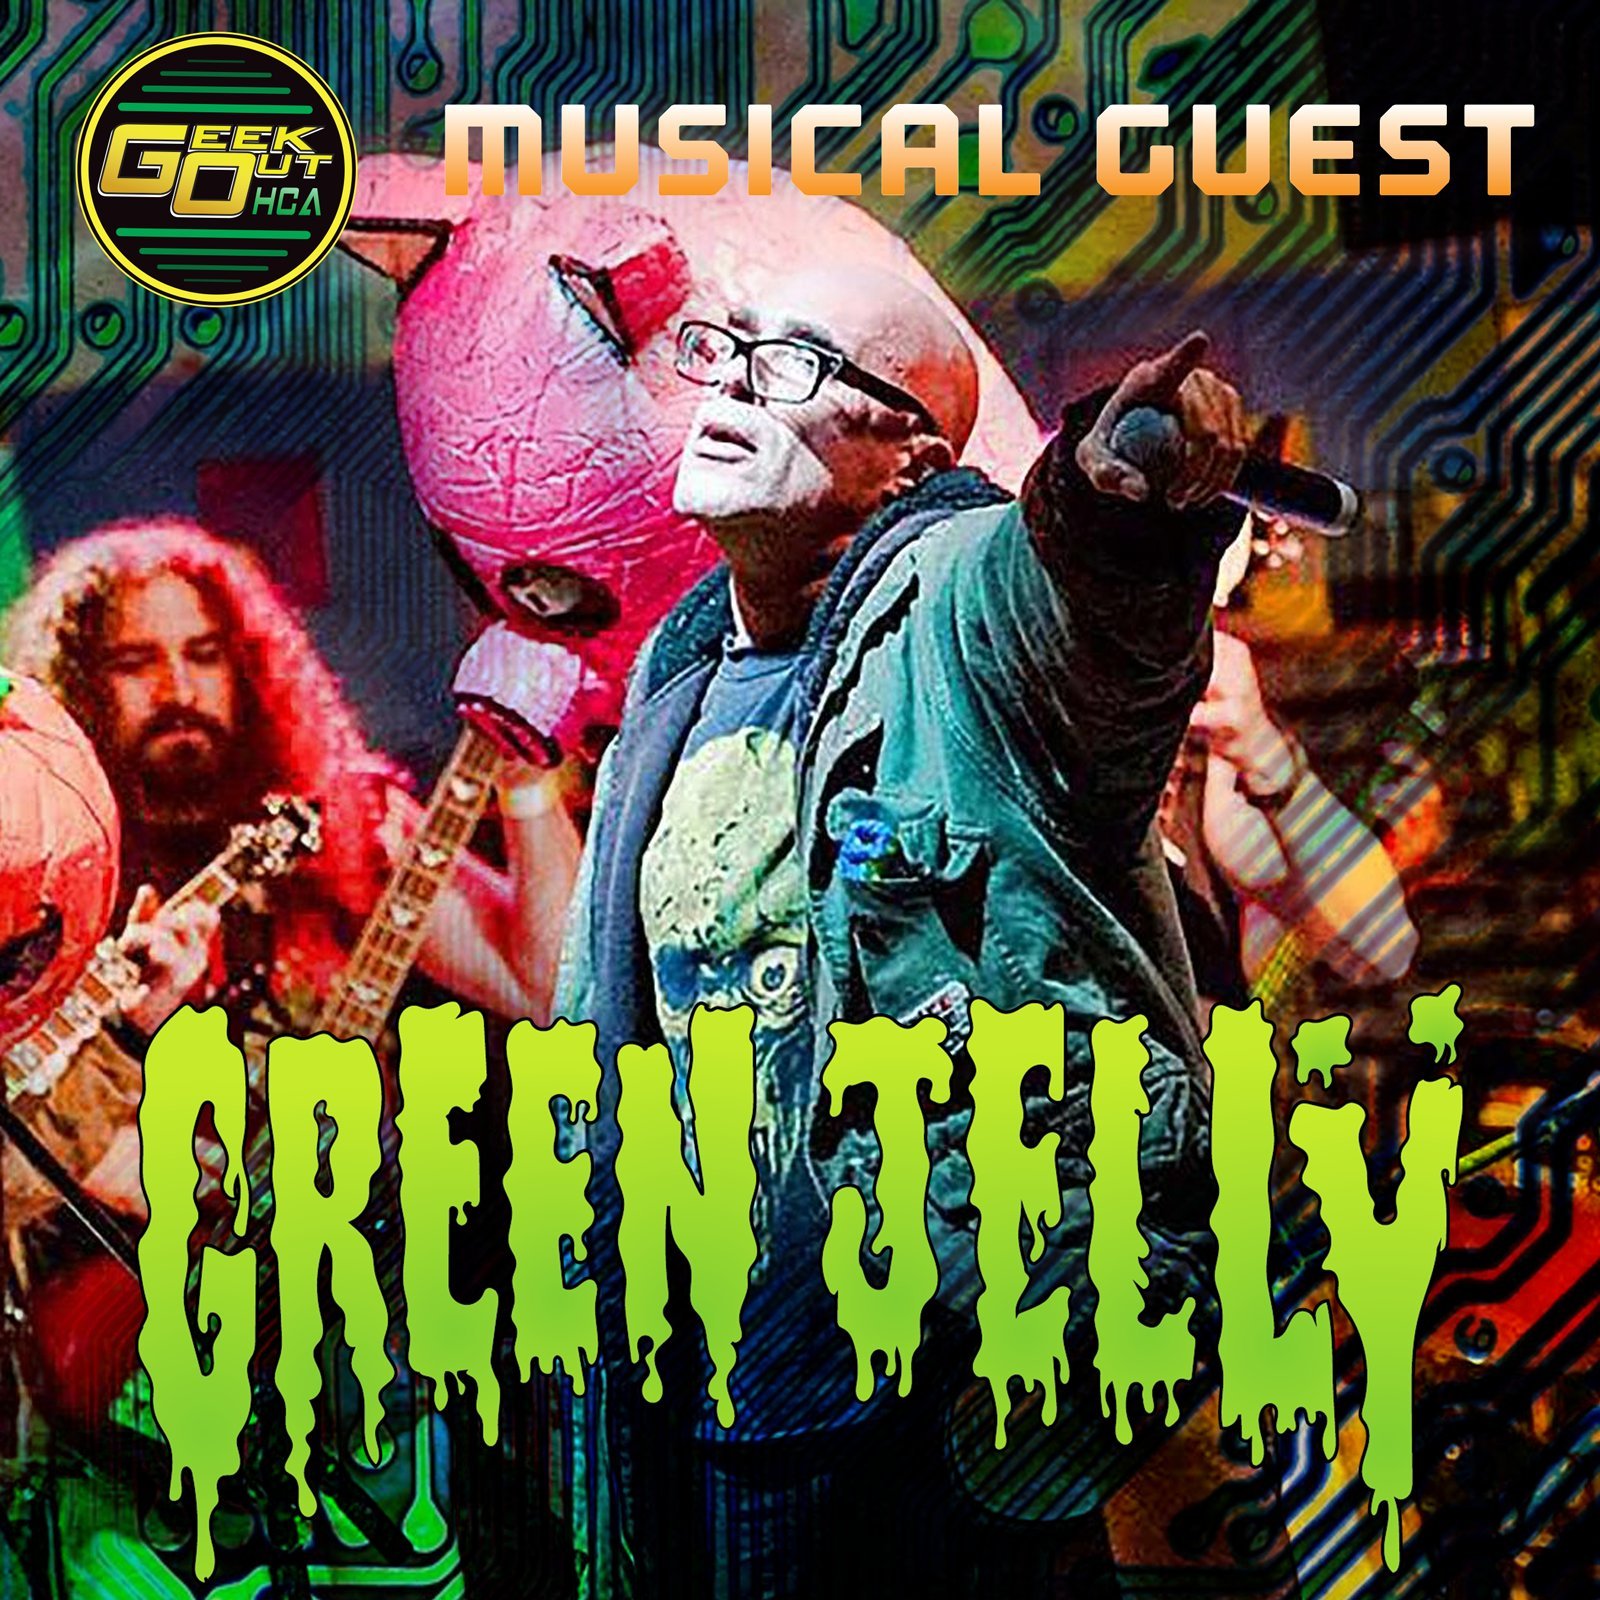   MUSICAL GUEST ANNOUNCEMENT  We hope you're as excited as we are and ready to rock out with Green Jellÿ this year!! Catch them Saturday during their meet and greet in the pavillion and again Saturday night as they headline main stage Bring your best